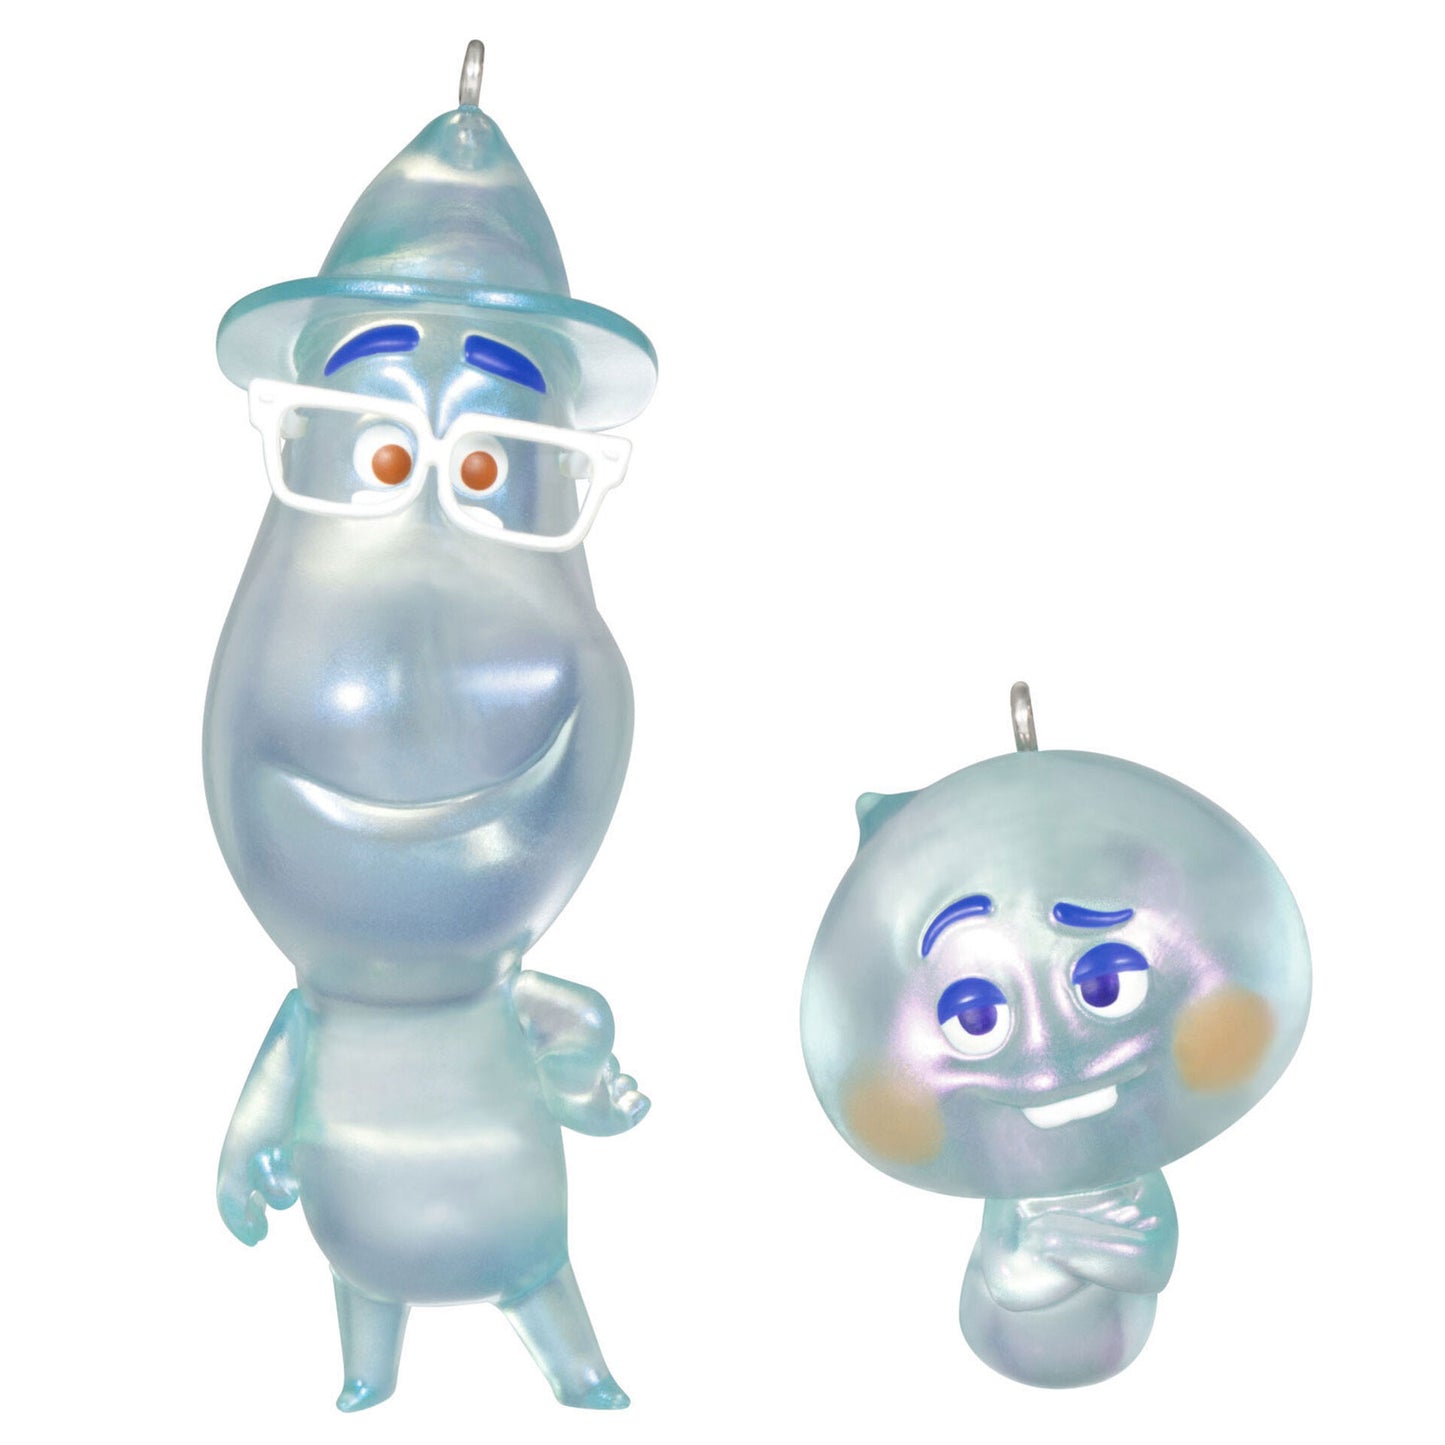 Two Christmas ornaments of the characters Joe Gardner and 22 from the Disney movie "Soul".